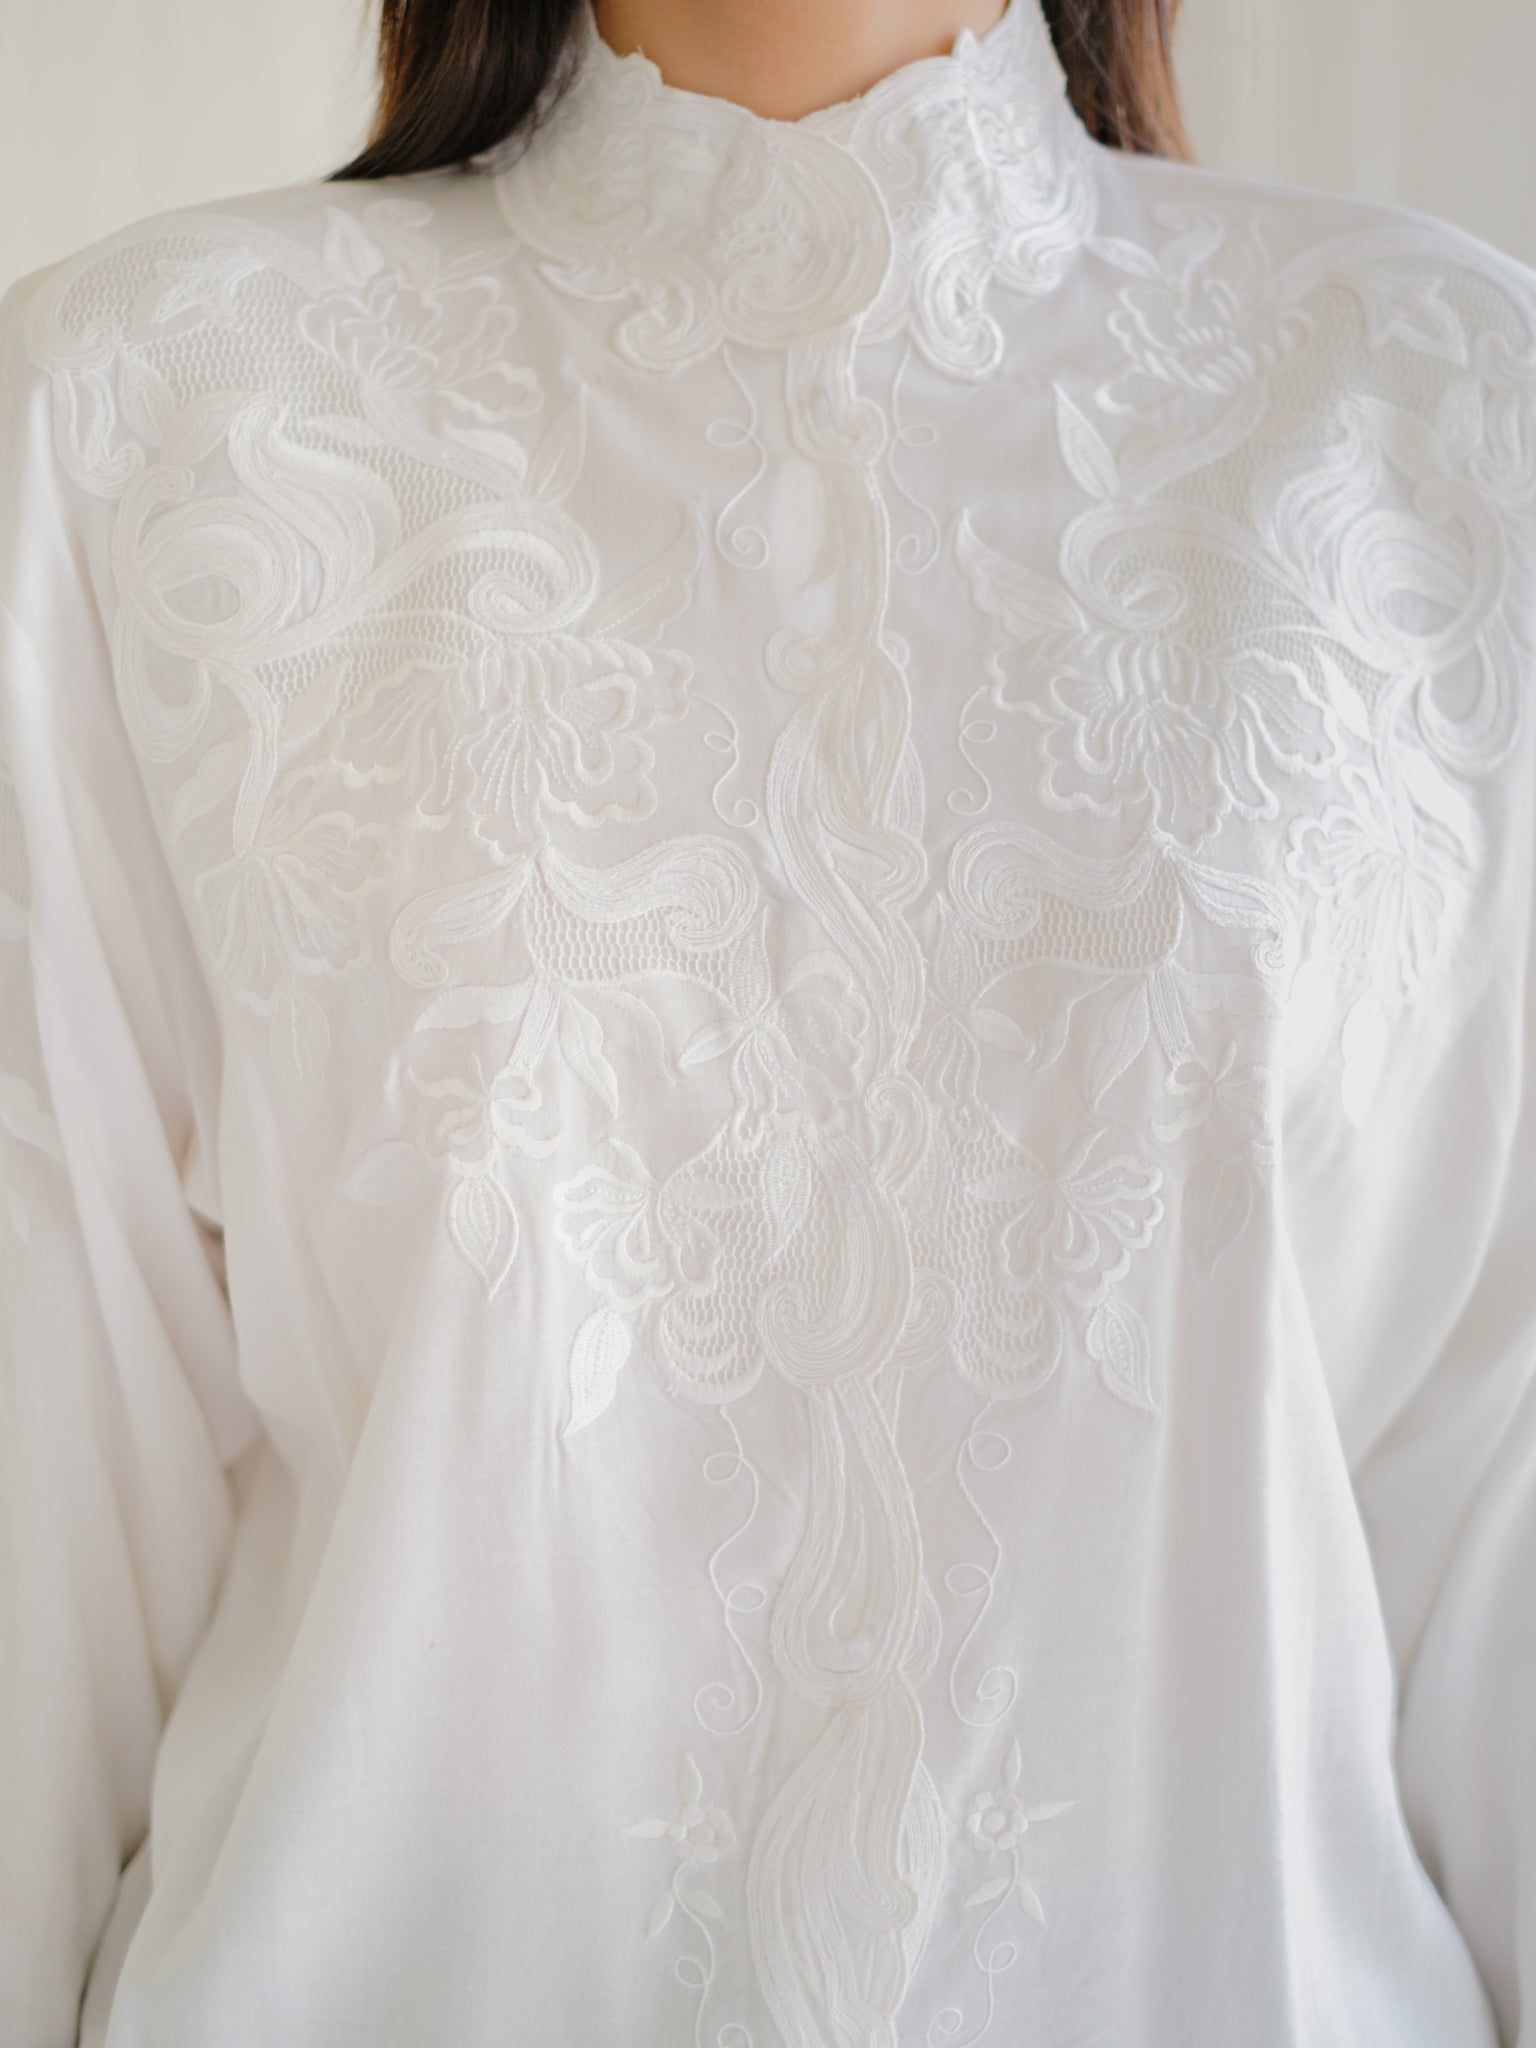 SUGARCREAM_VINTAGE_WHITE_LACE_EMBROIDERED_BLOUSE_3